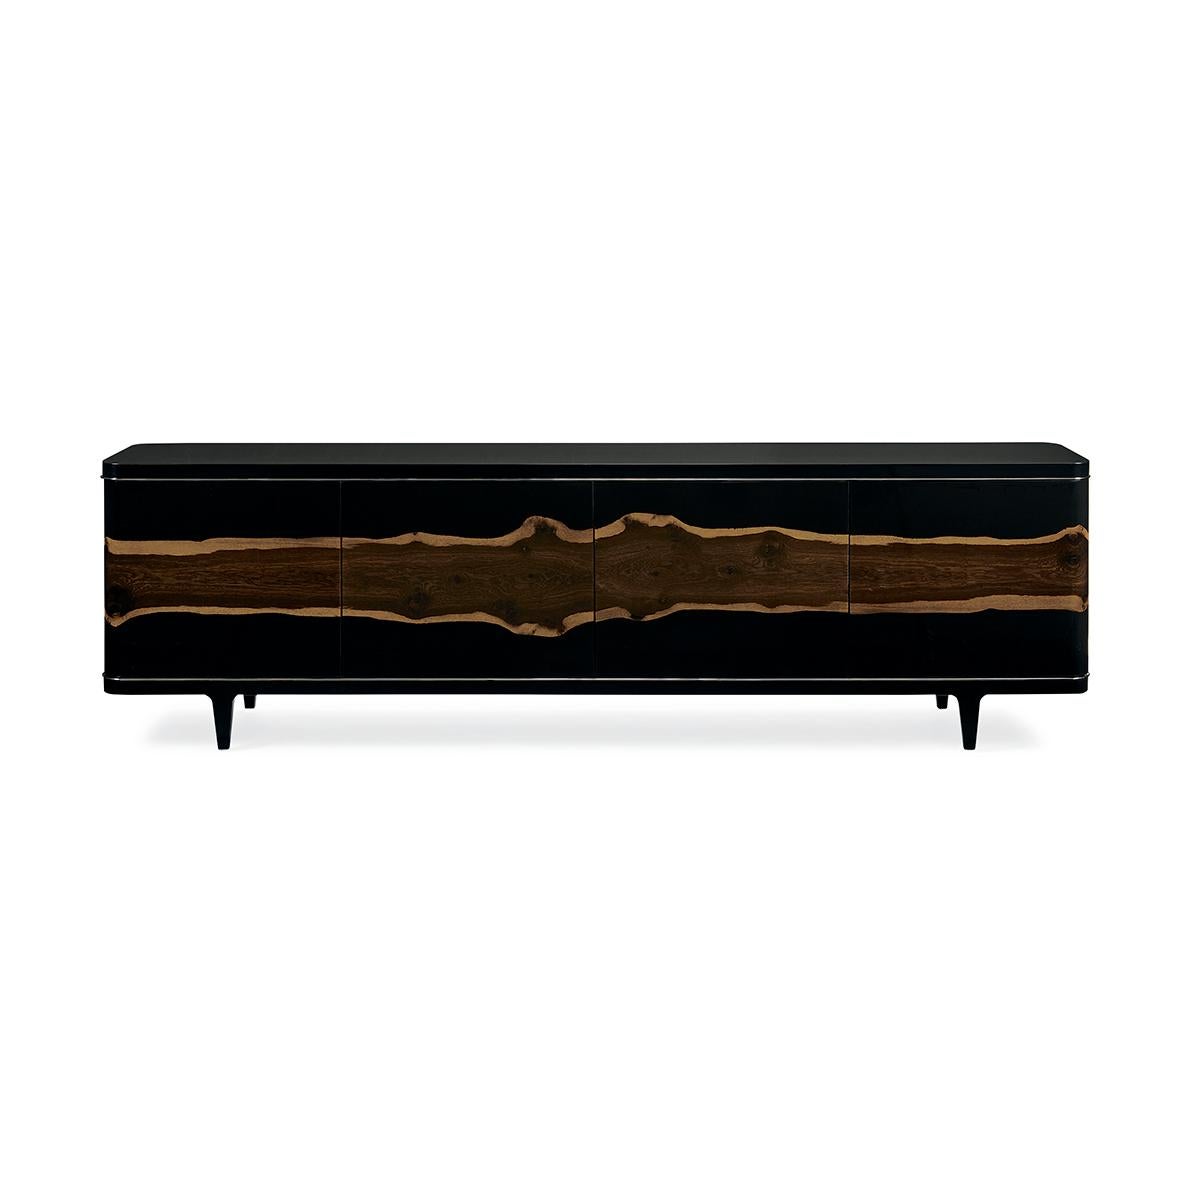 Mid Century Natural Entertainment cabinet. A 100-inch length of clean lines and graceful curves distinguish this exquisite entertainment consoles sleek silhouette that is finished in an elegant Piano Black and inset with an awe-inspiring live edge